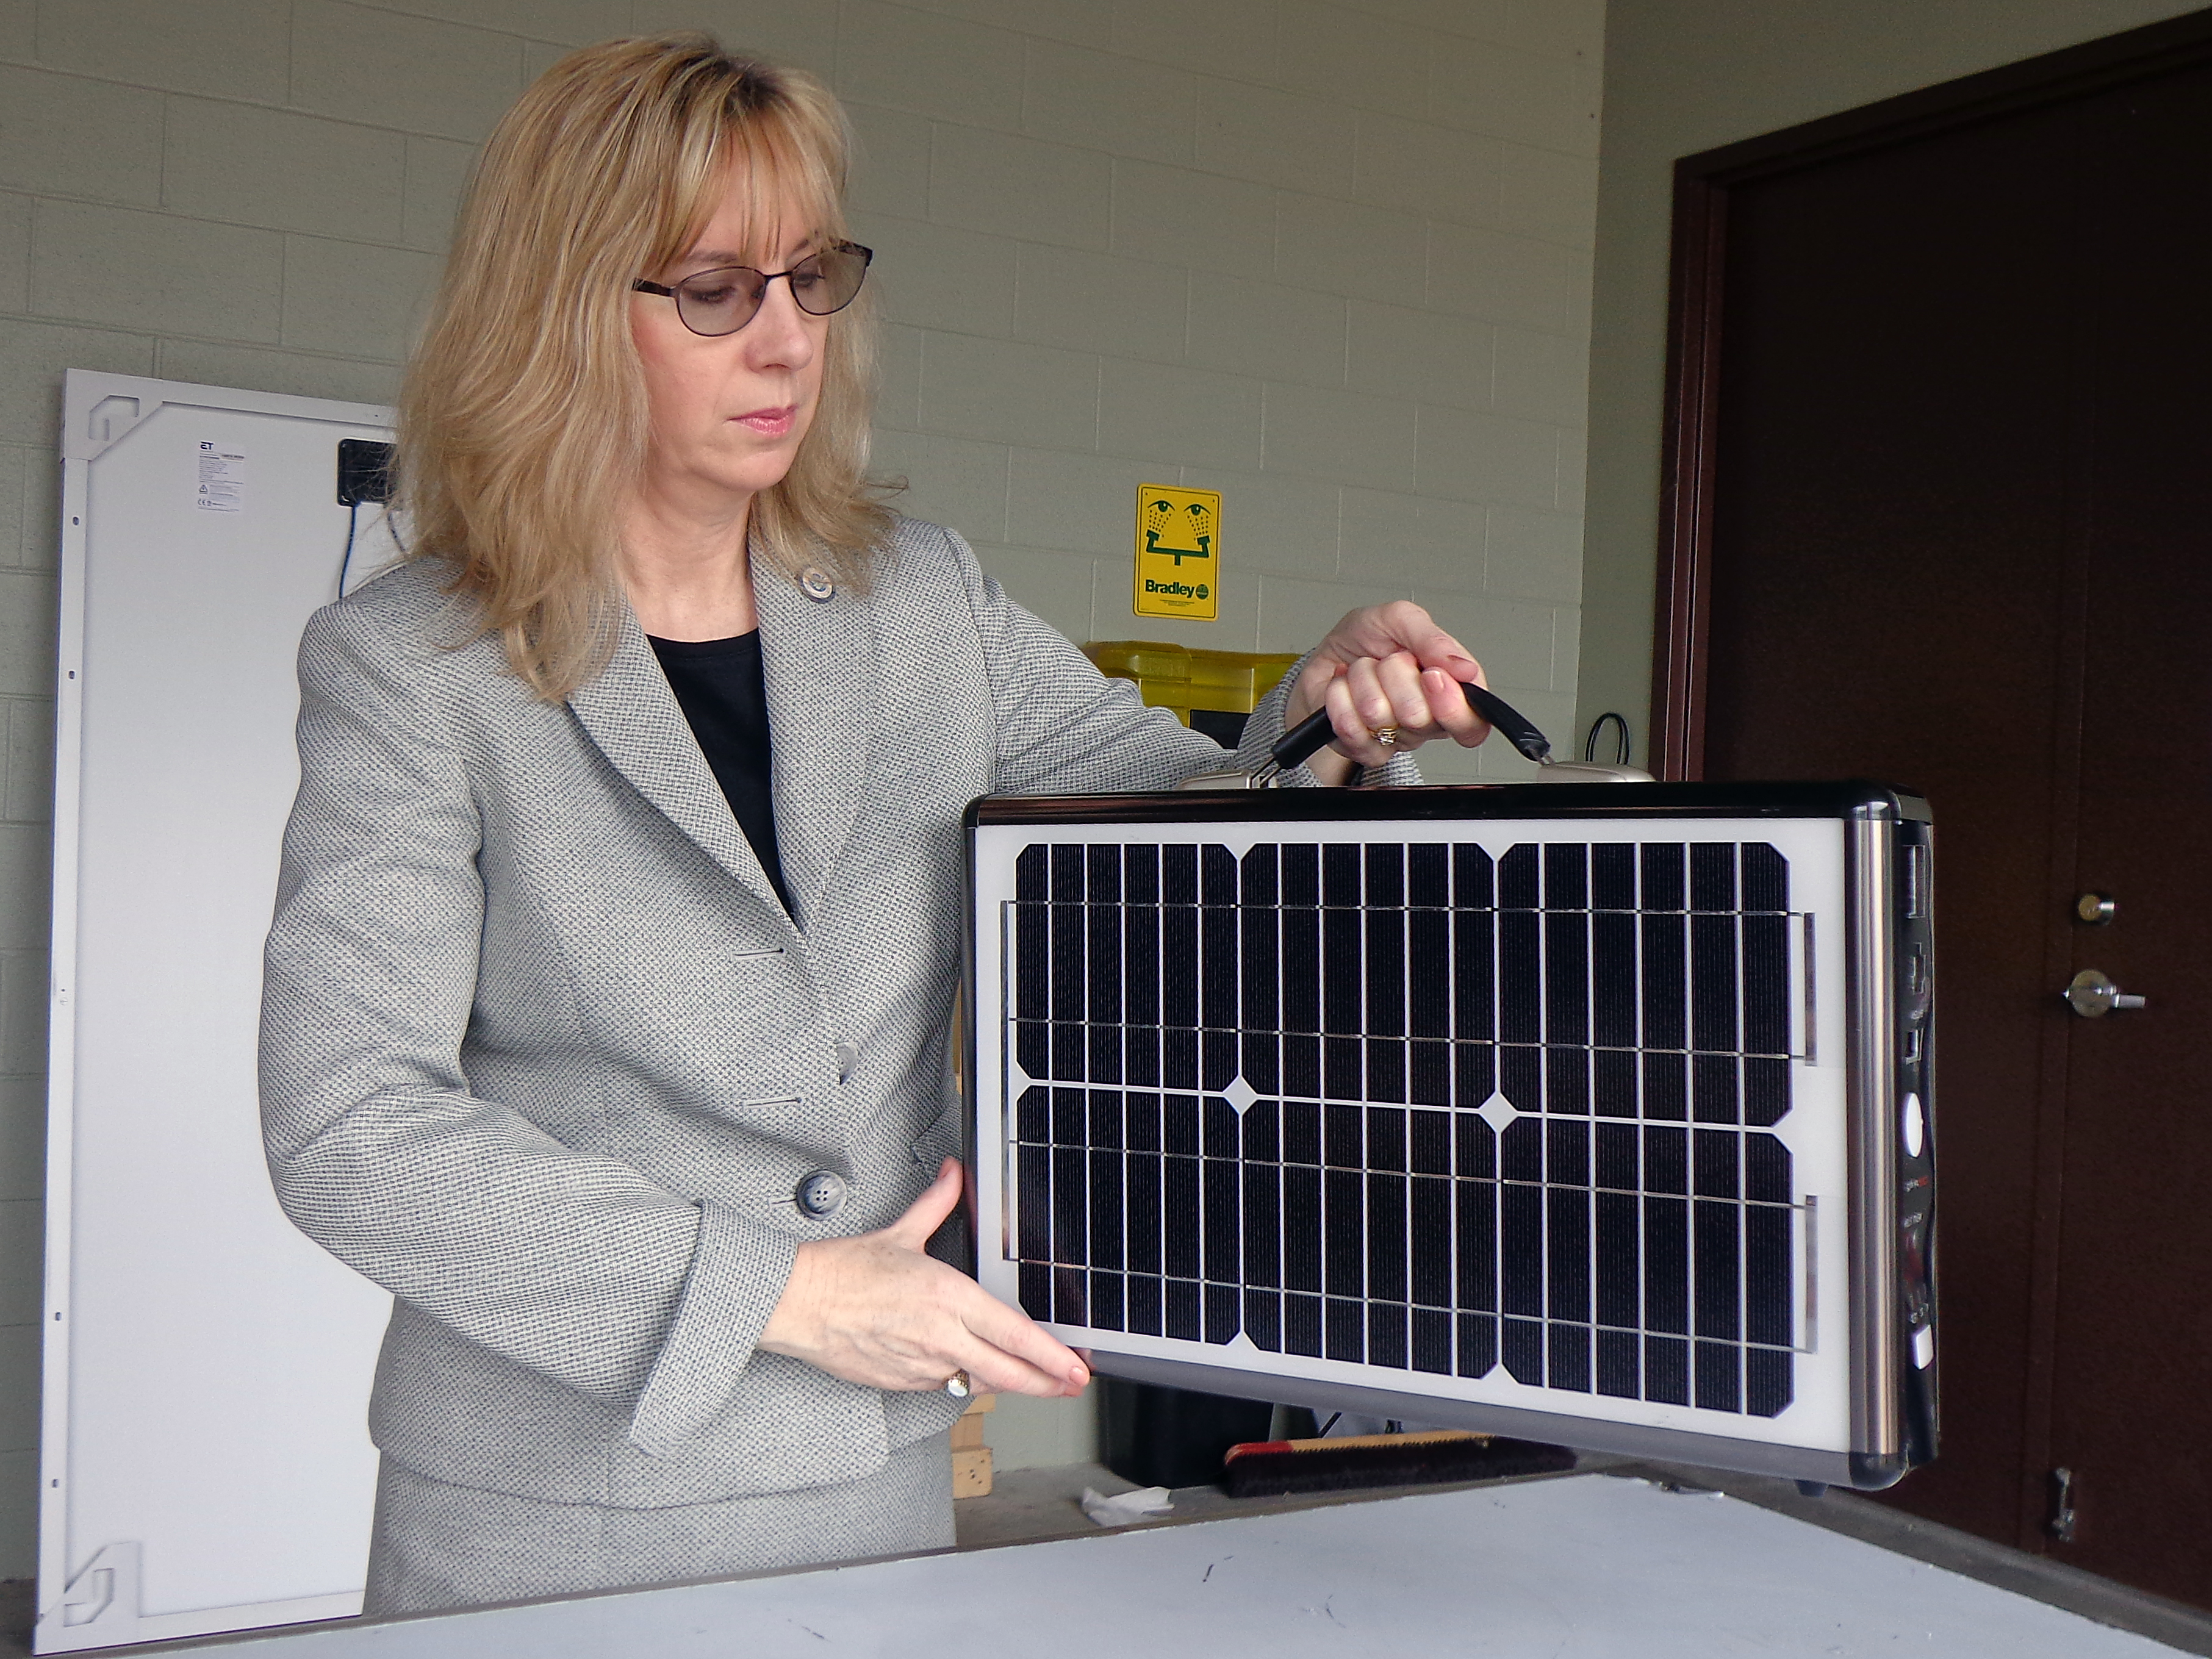 Senior Import Specialist Laurie Pazzo inspects a mobile solar power unit that was listed on shipping documents as a suitcase. Photo by Scott Sams